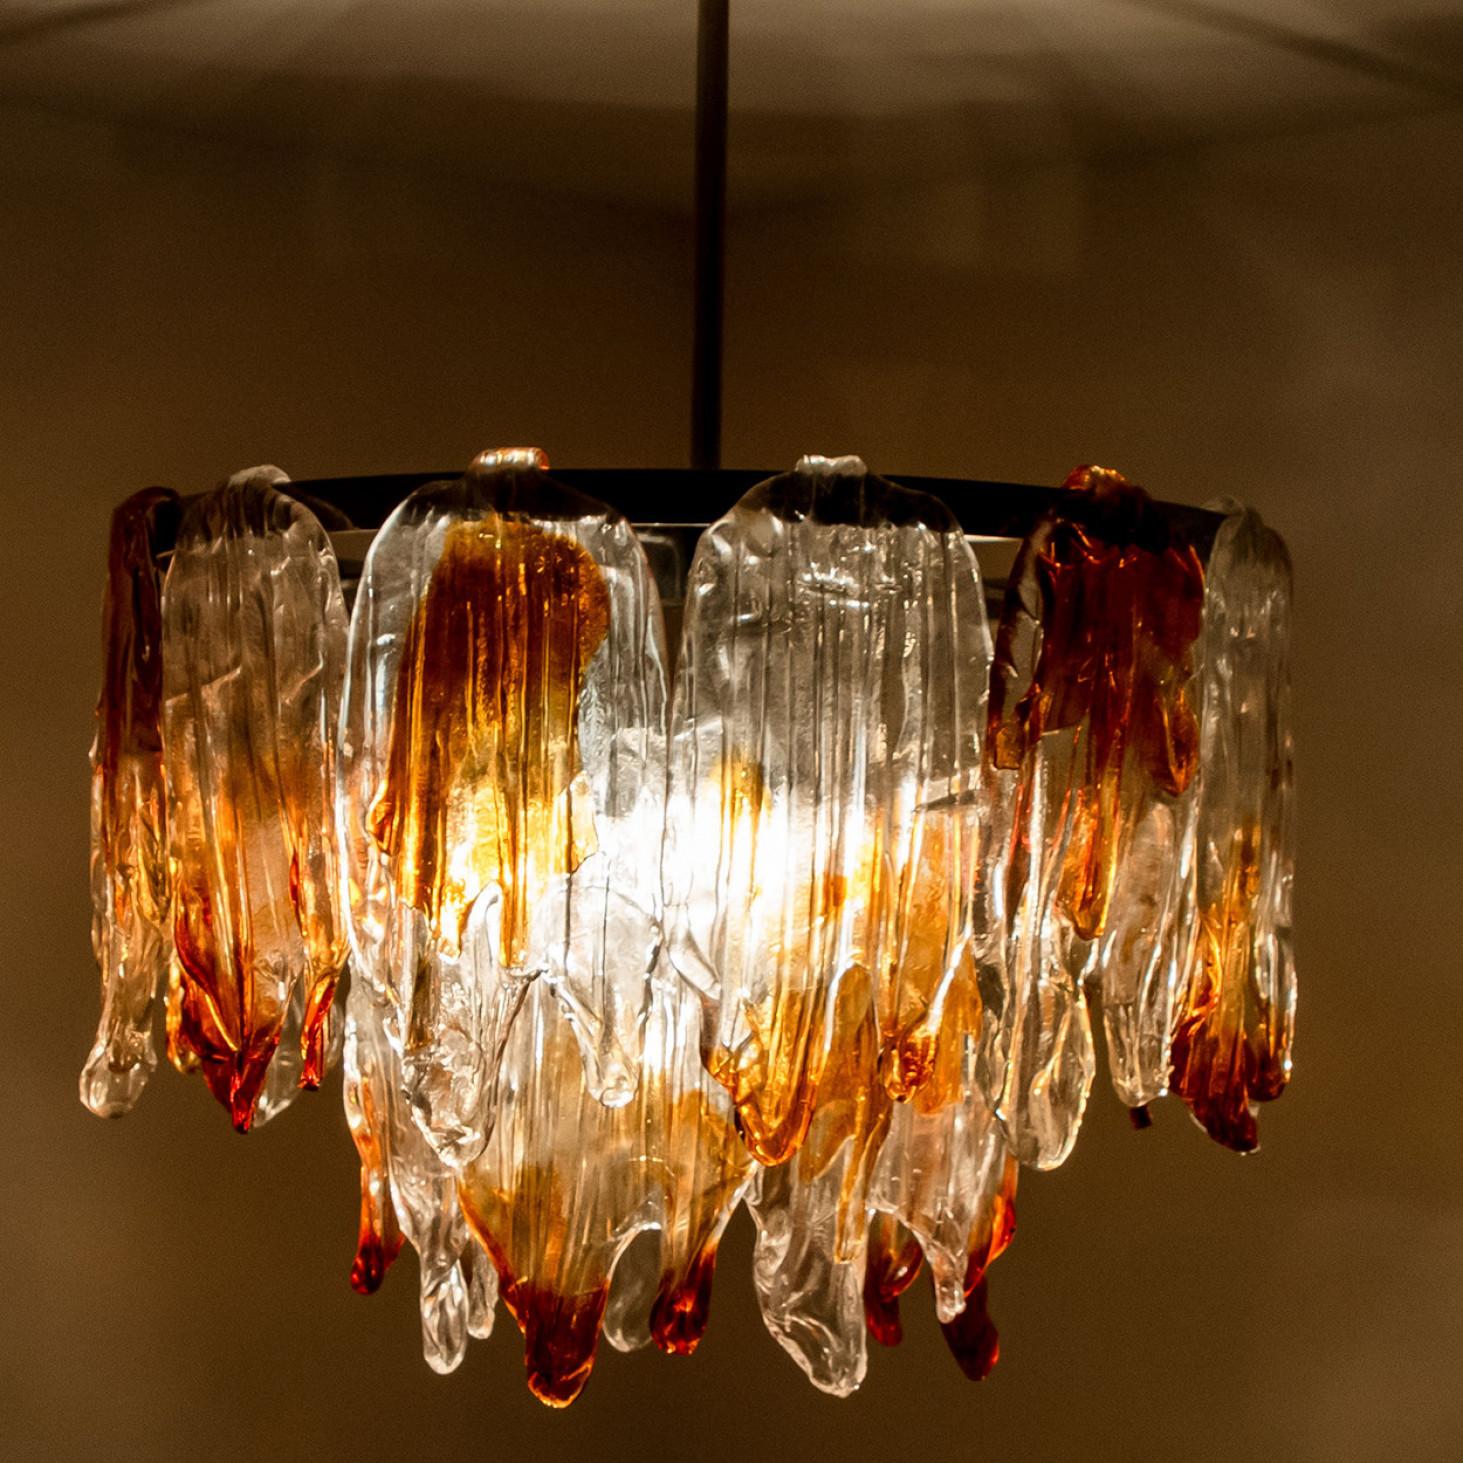 Orange and Clear Murano Glass Chandelier by Mazzega, 1960s For Sale 5